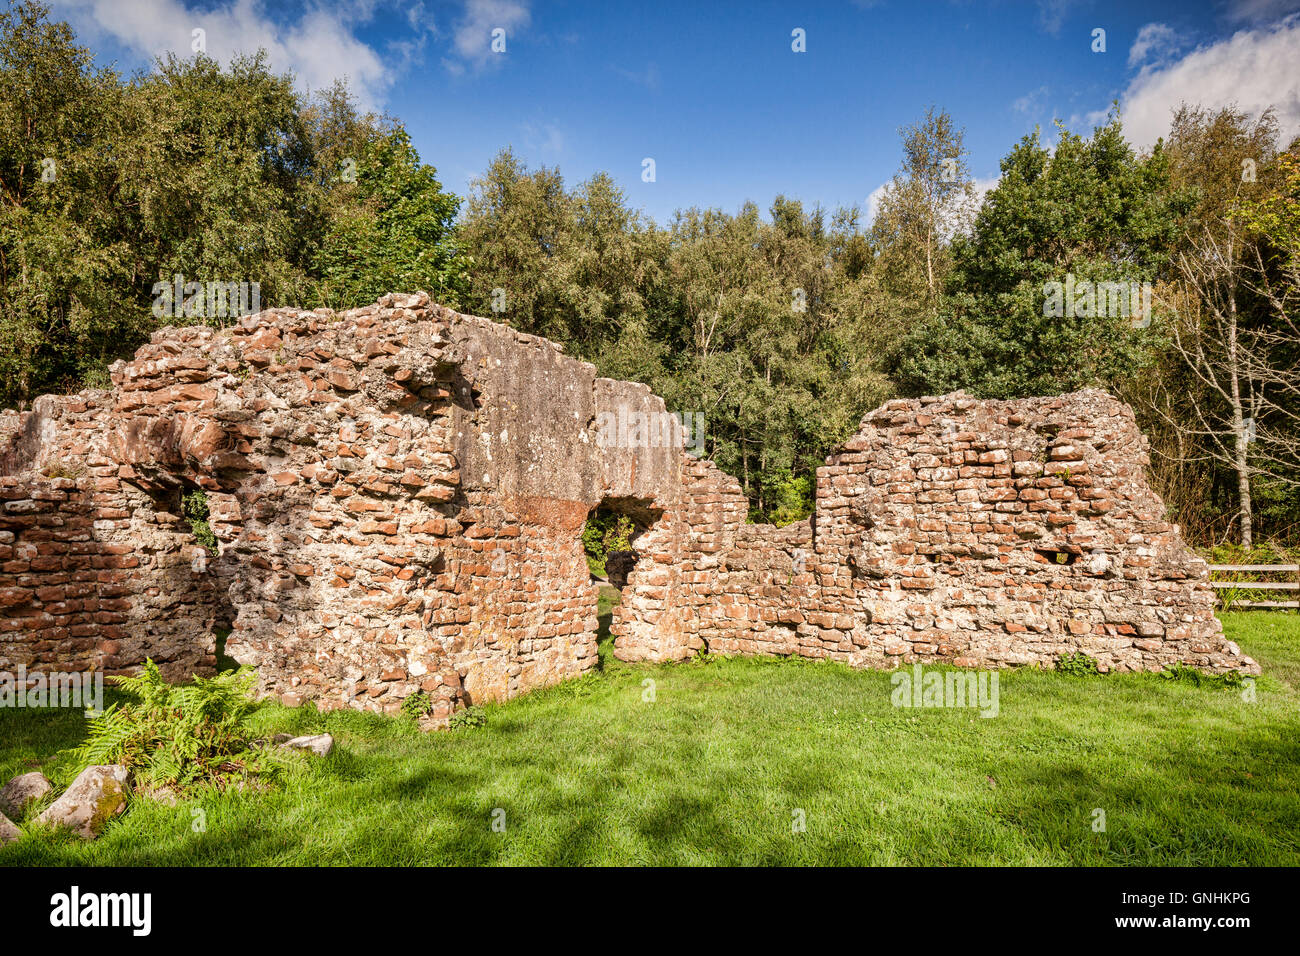 Ruins of the Roman bath house at Glannoventa, the modern Ravenglass, in Cumbria, England, UK Stock Photo